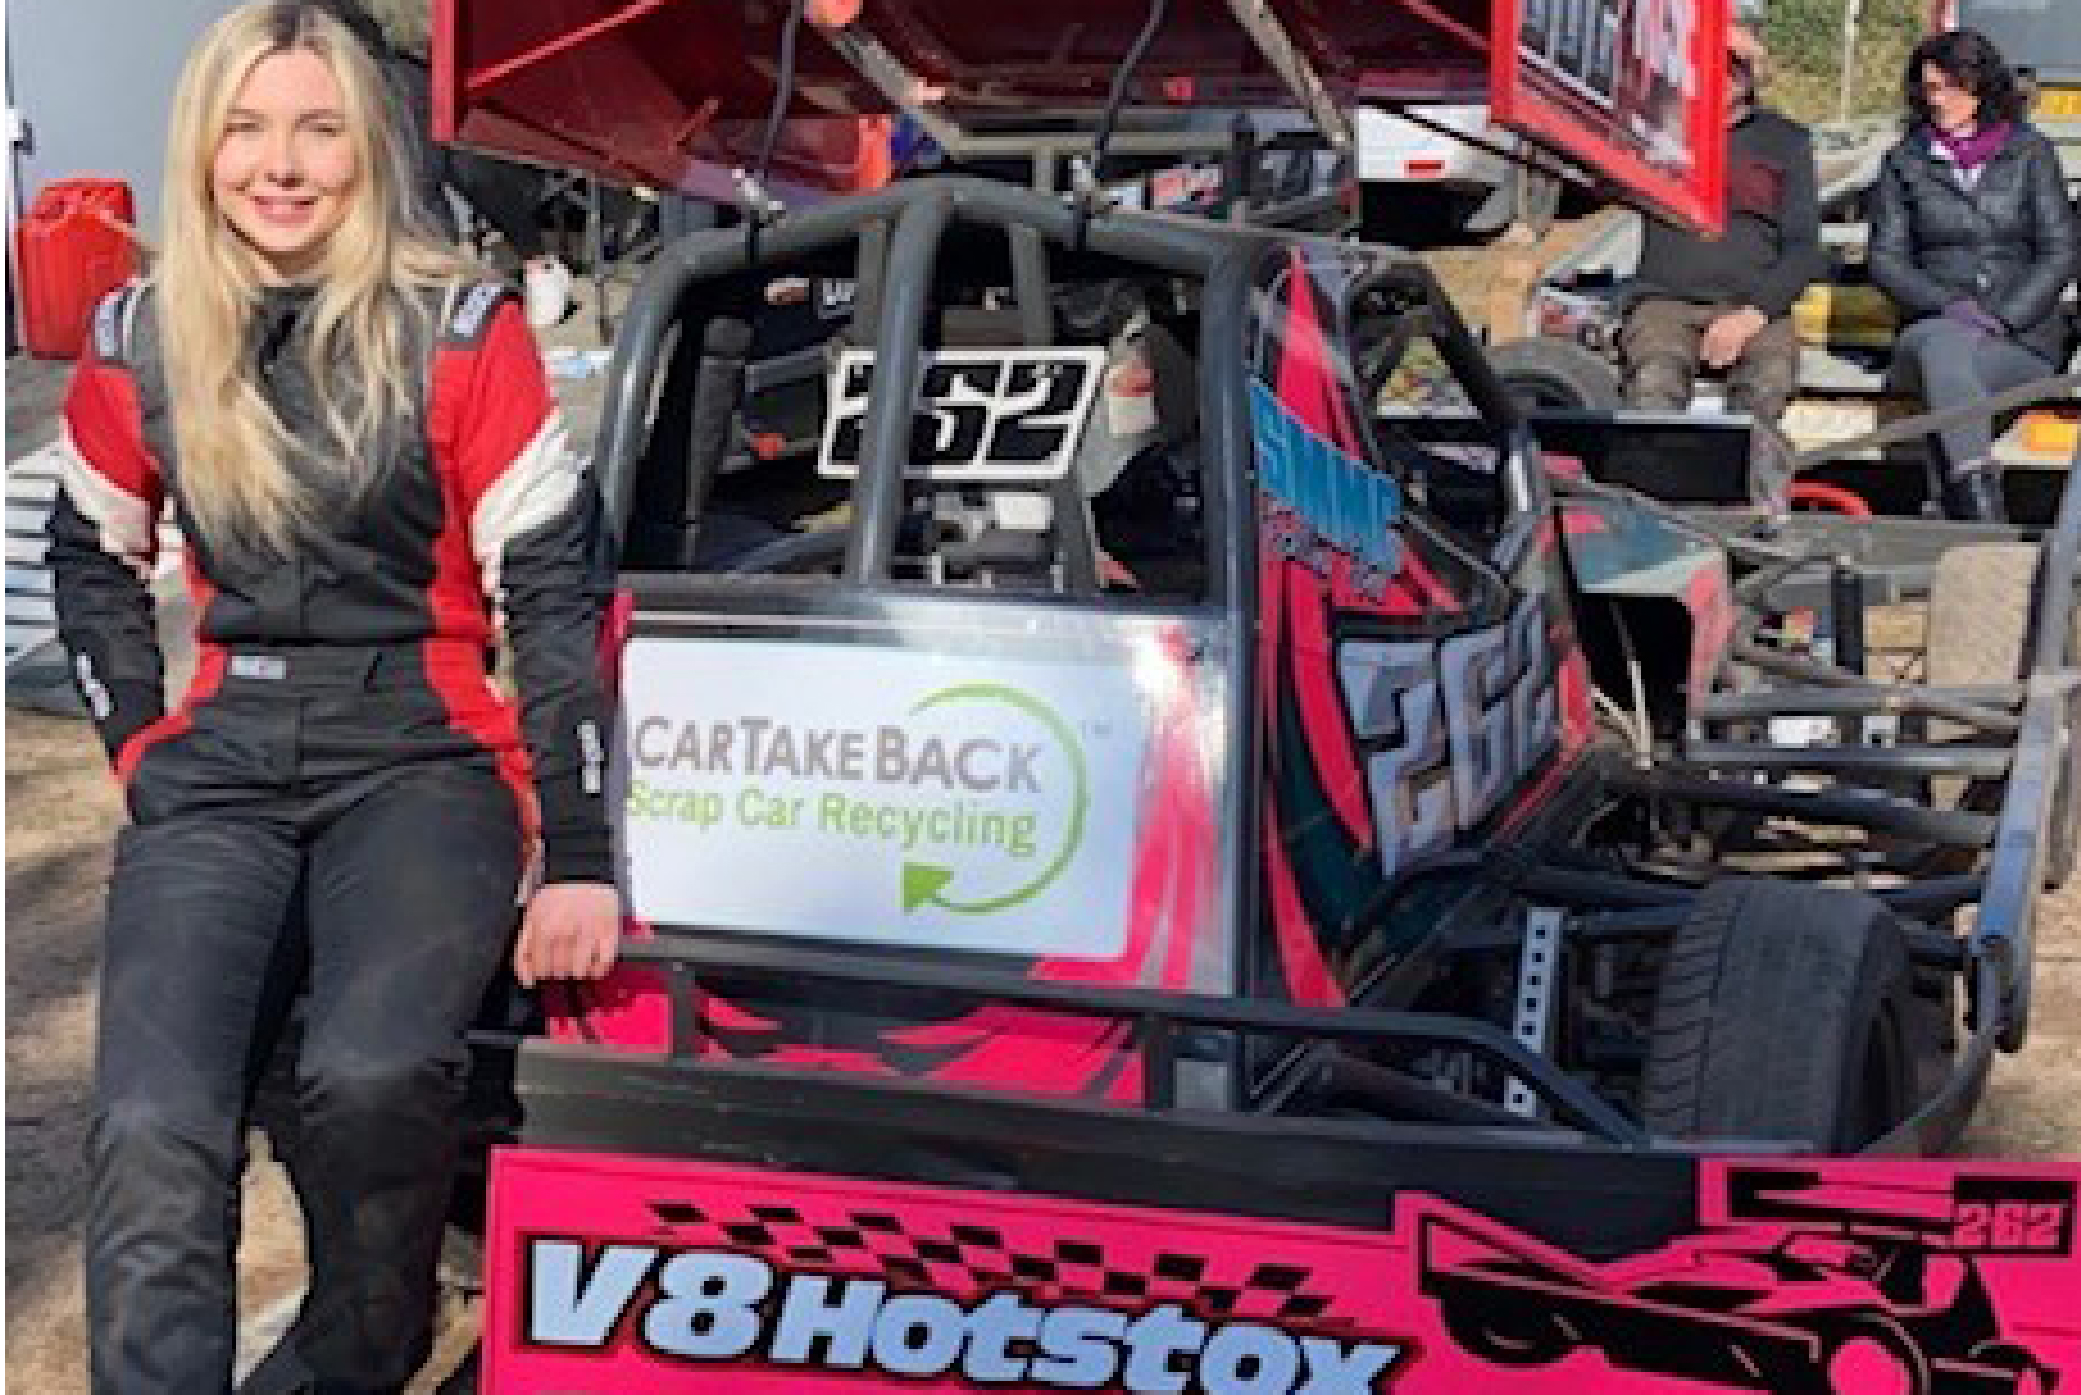 Racing driver Camey Dorrell leaning against her pink and black stock car with the CarTakeBack logo on the rear